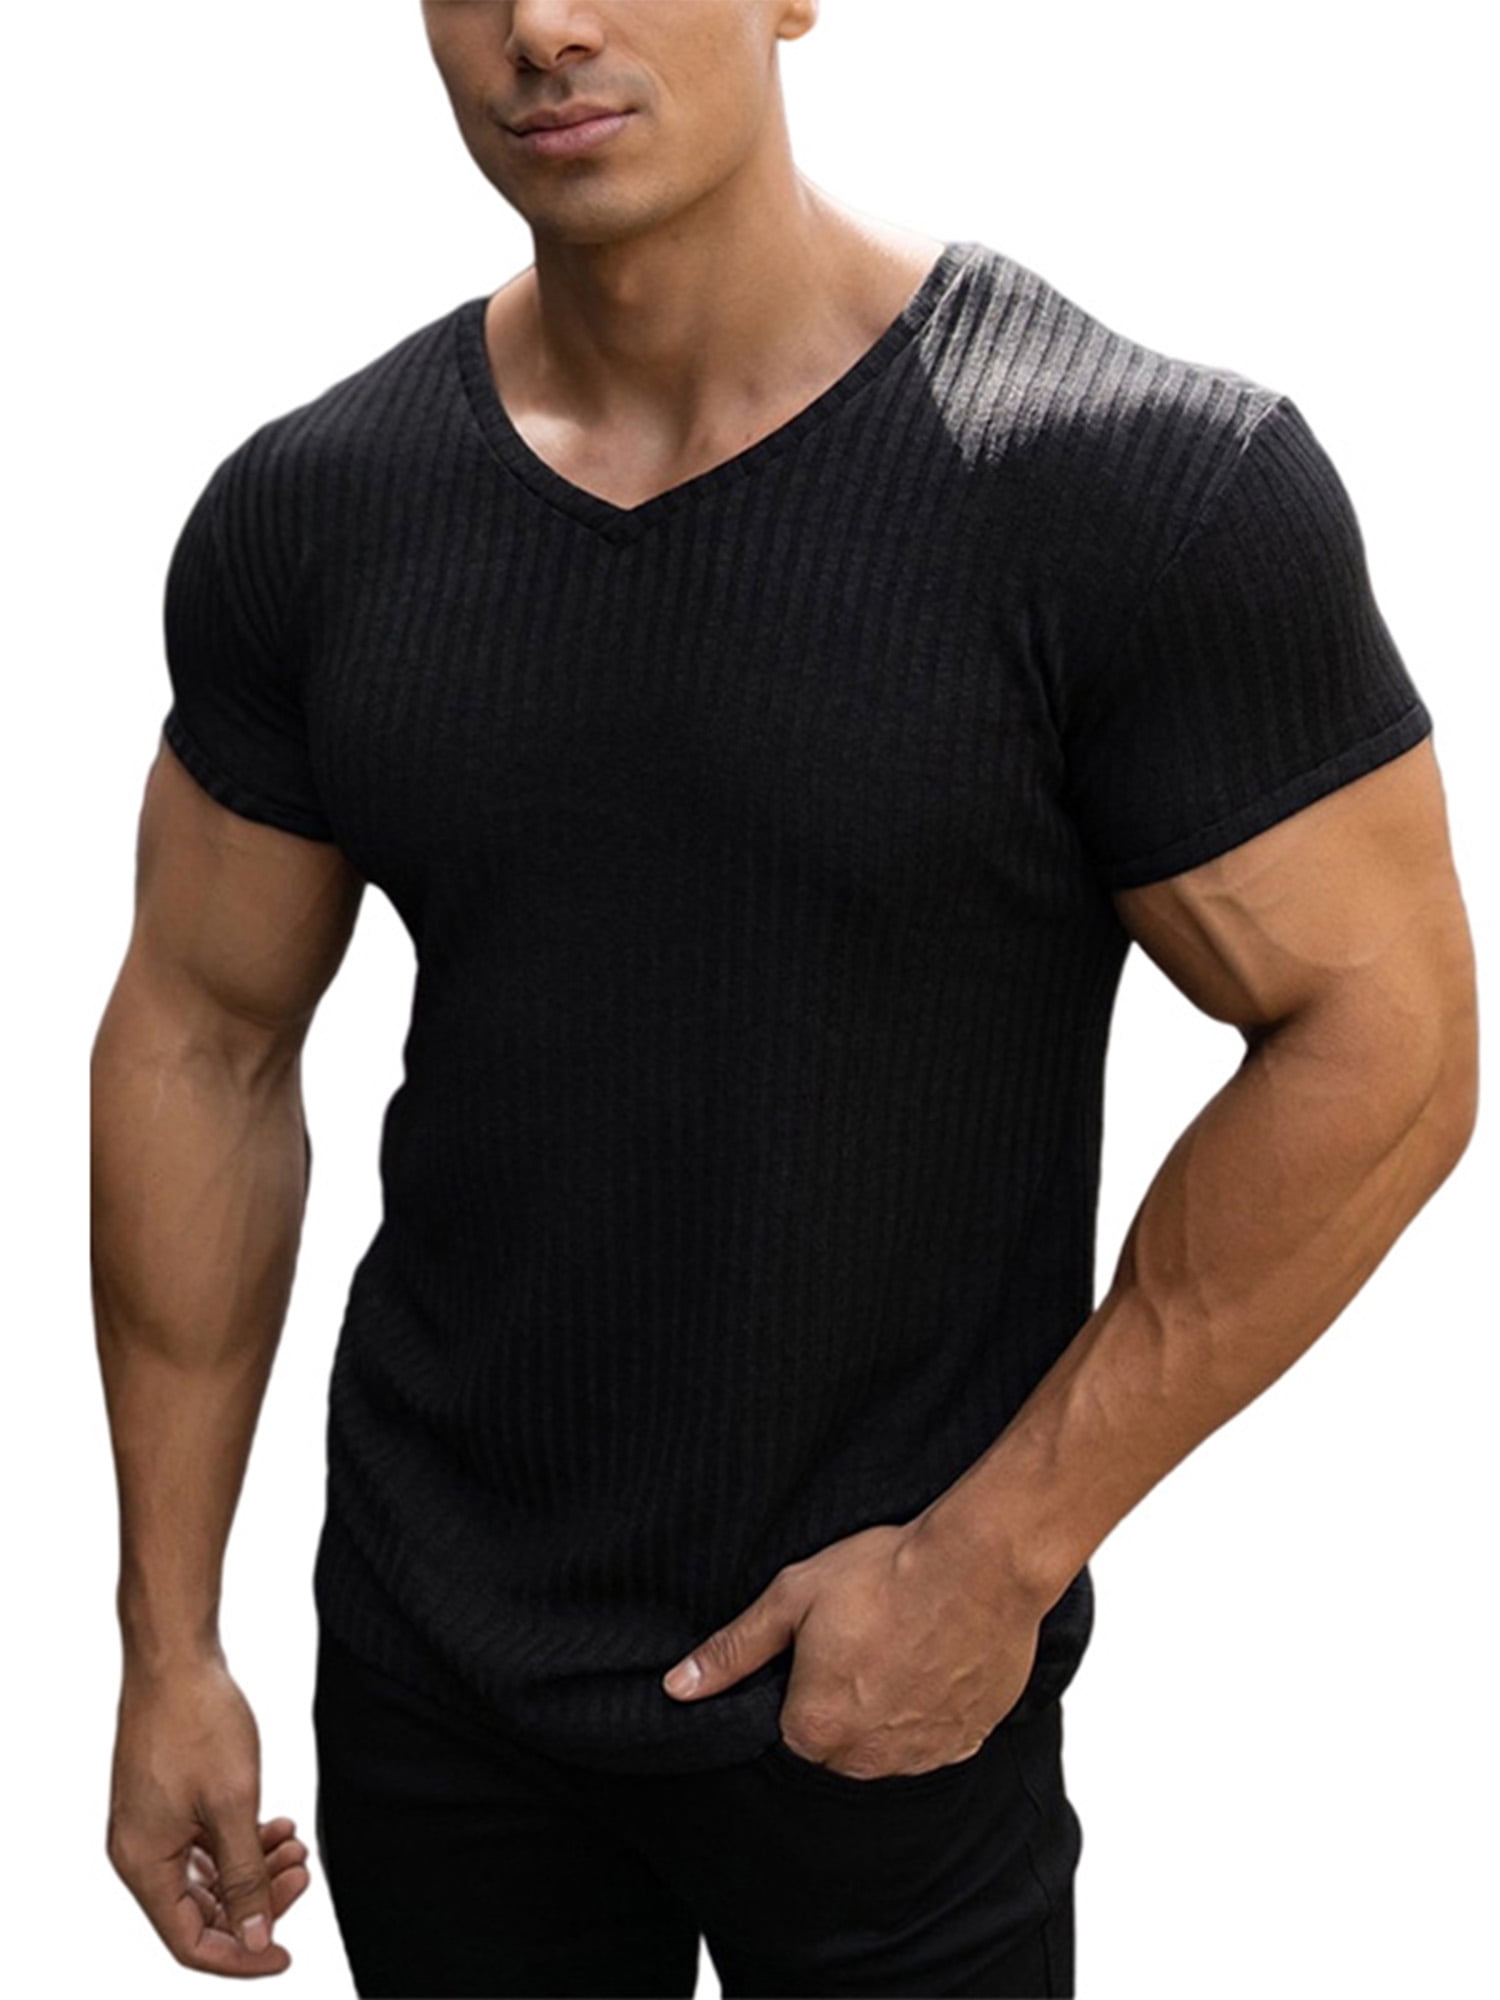 UKAP Summer Stretchy Pullover Top for Men Slim Fit Breathable T-Shirts ...